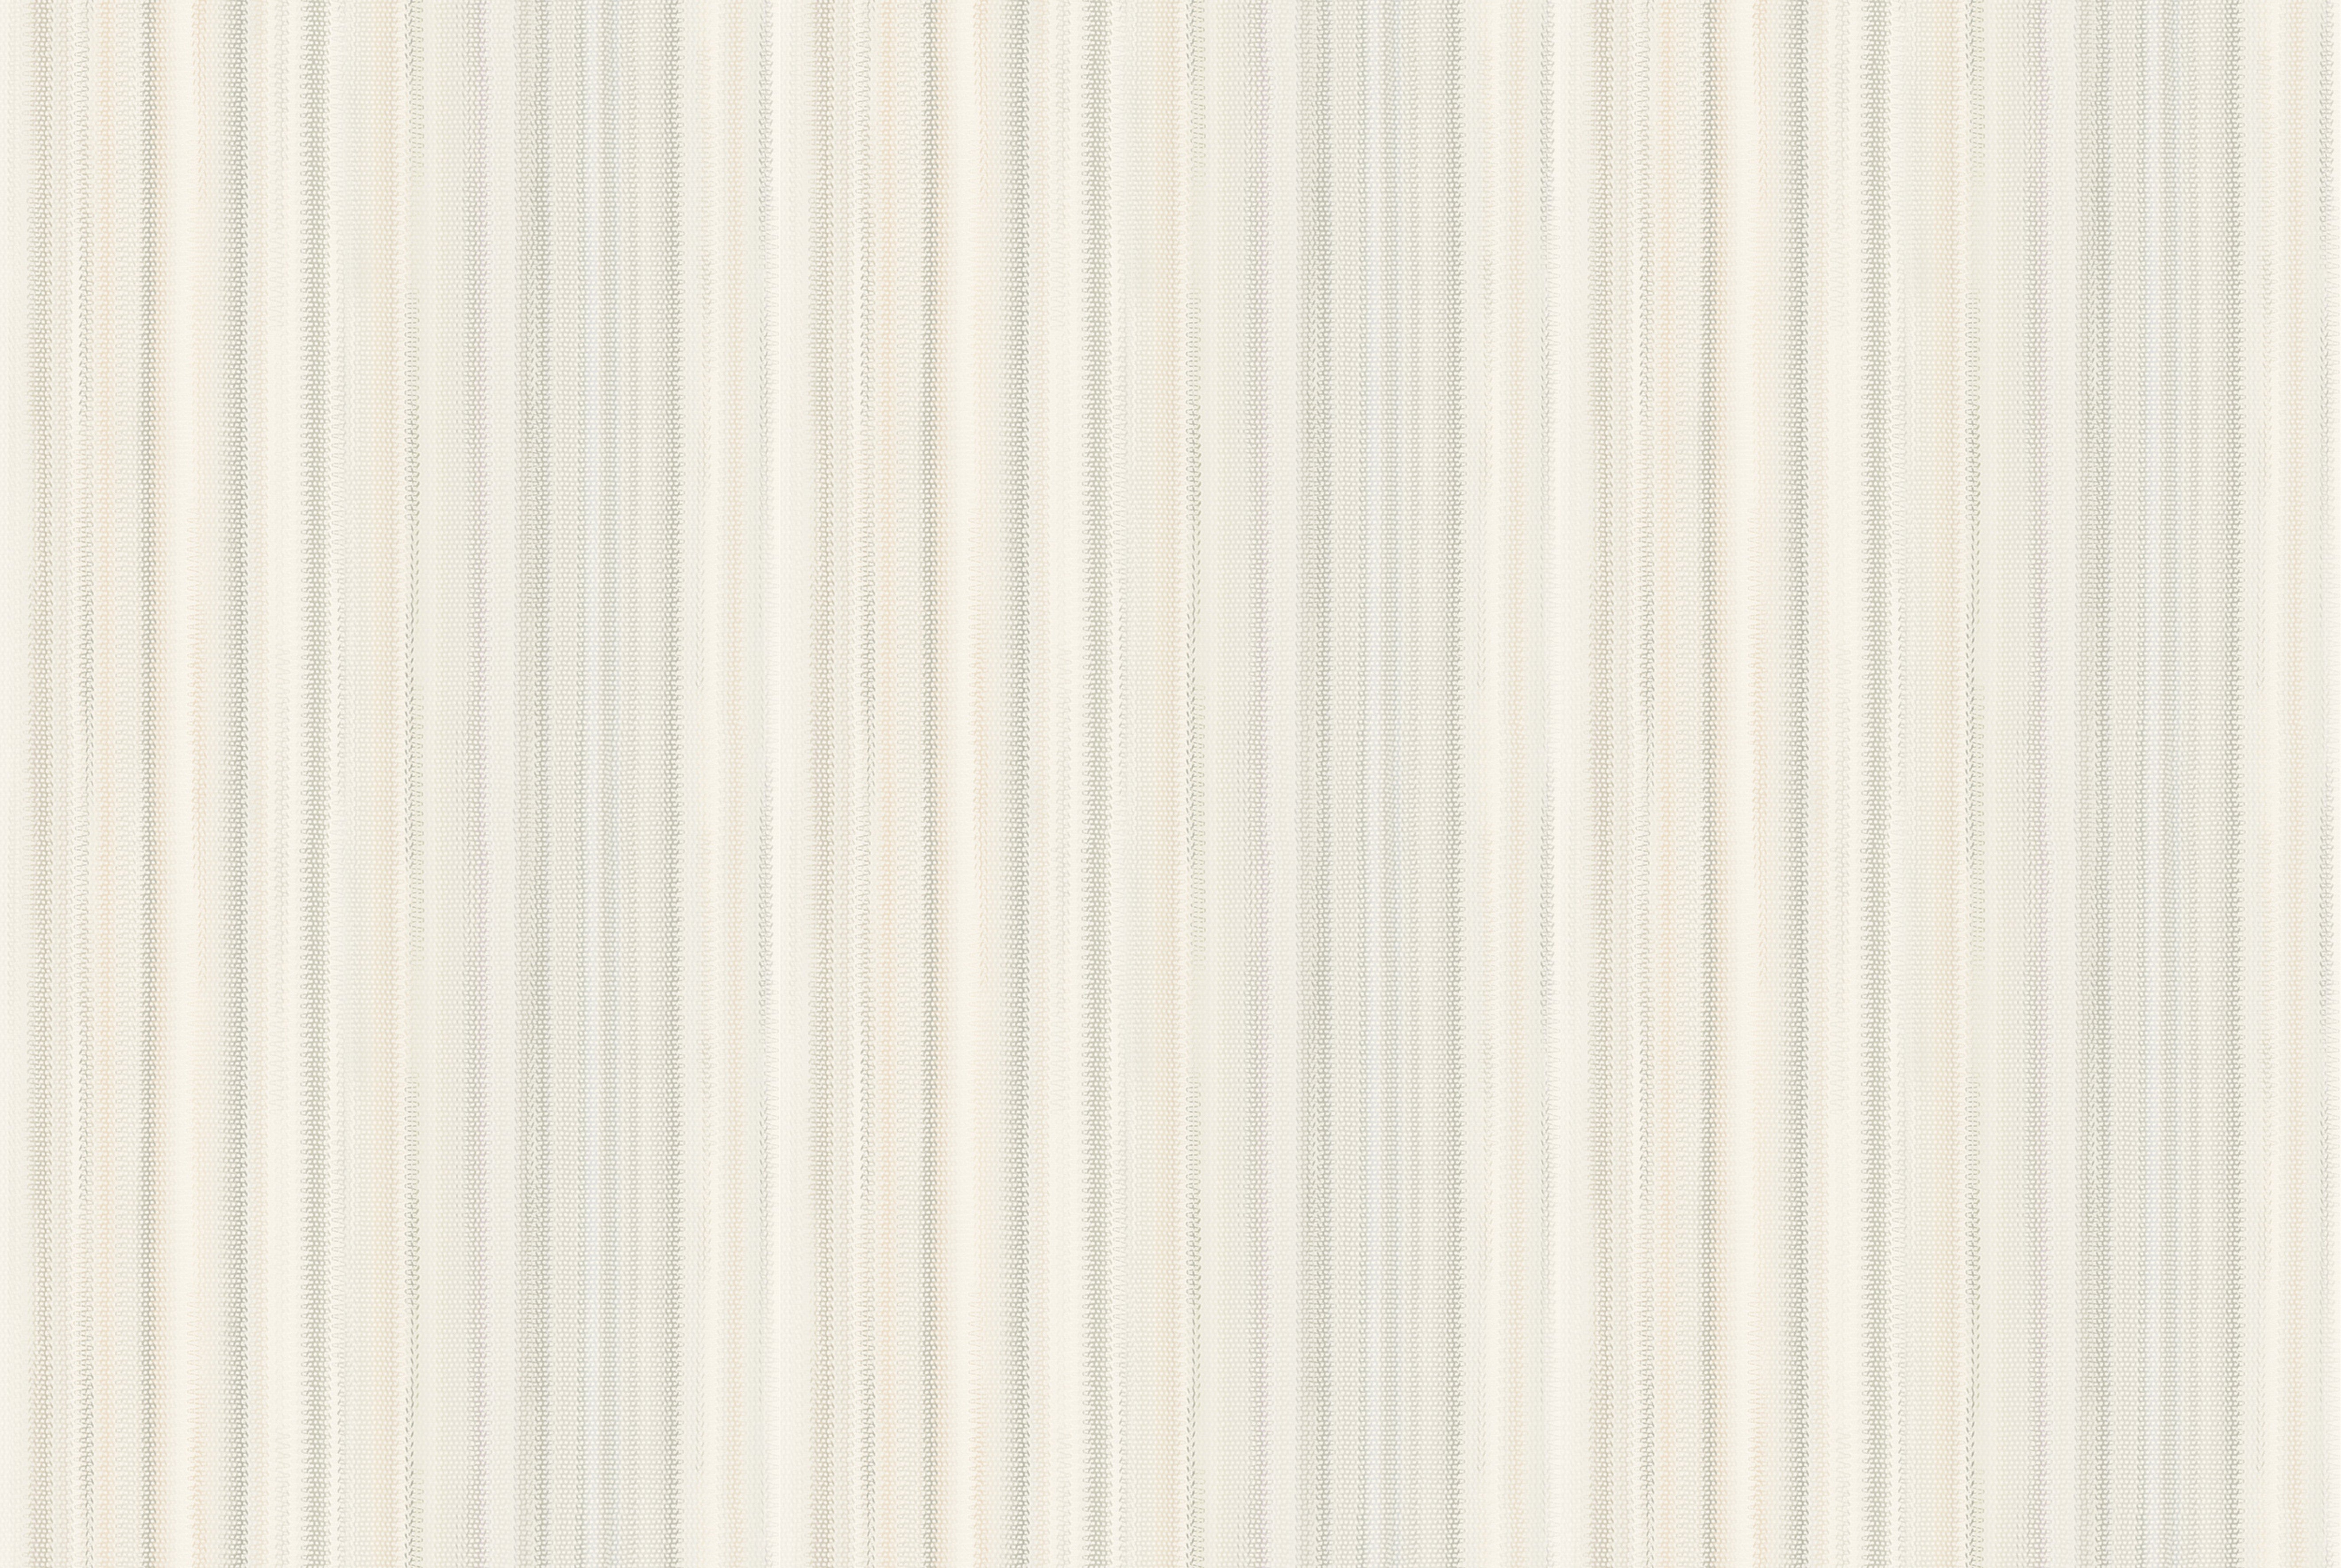 Missoni Home Wallcoverings 04 Striped Sunset 10397